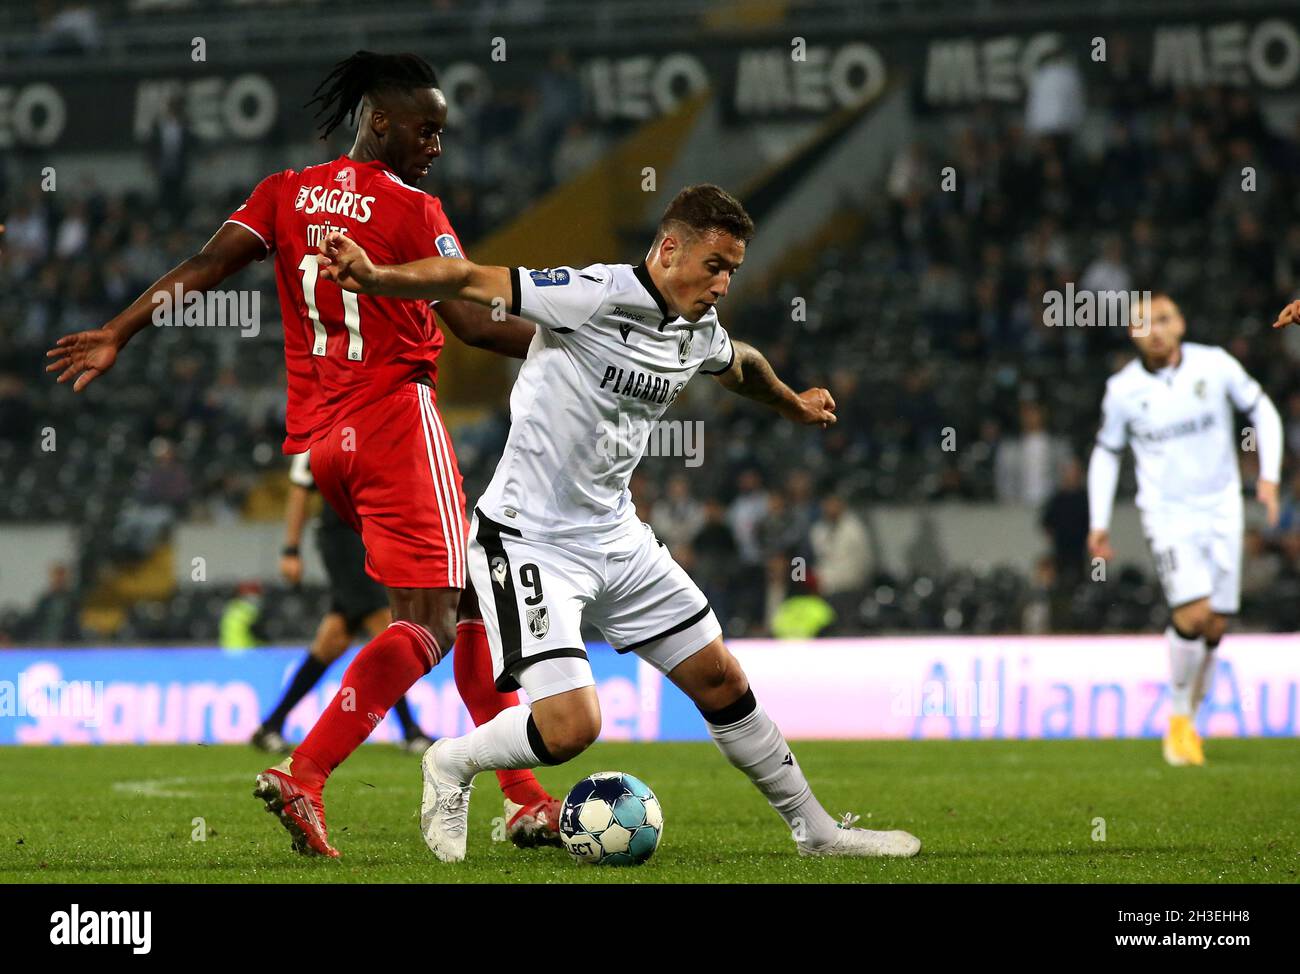 GUIMARAES, PORTUGAL - OCTOBER 27: Bruno Duarte of Vitoria Sc competes for the ball with Soualiho Meite of Benfica SL ,during the Portugal Allianz Cup match between Vitoria SC and Benfica SL at Estadio Dom Afonso Henriques on October 27, 2021 in Guimaraes, Portugal. (Photo by MB Media) Stock Photo